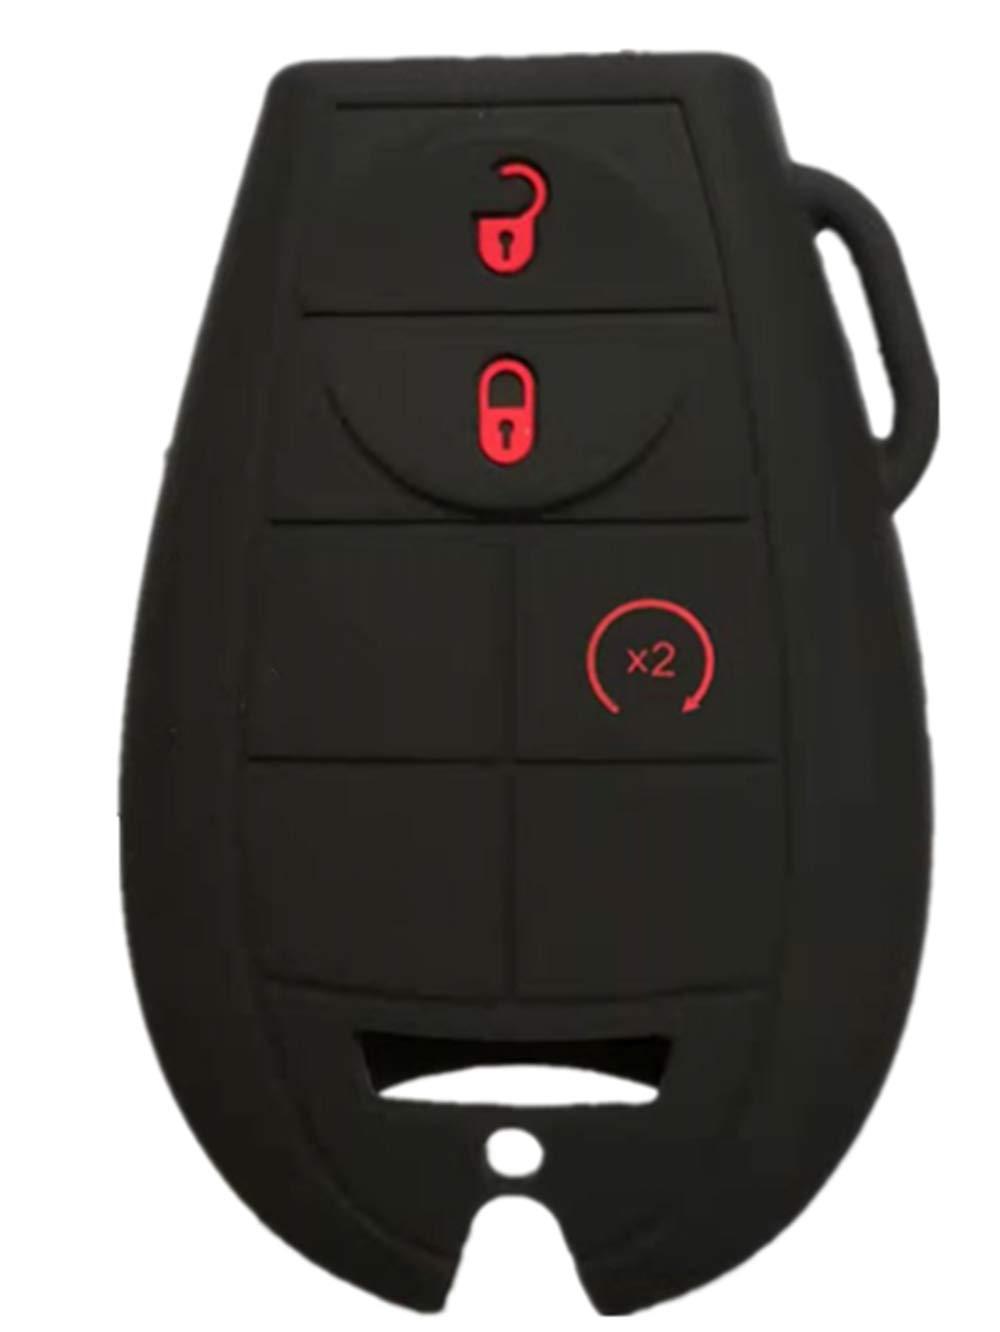  [AUSTRALIA] - RUNZUIE Silicone Keyless Entry Remote Key Fob Cover Case Protector for Jeep Grand Cherokee Commander Dodge Challenger Charger Durango Grand Caravan Journey Magnum Ram 1500 2500 3500